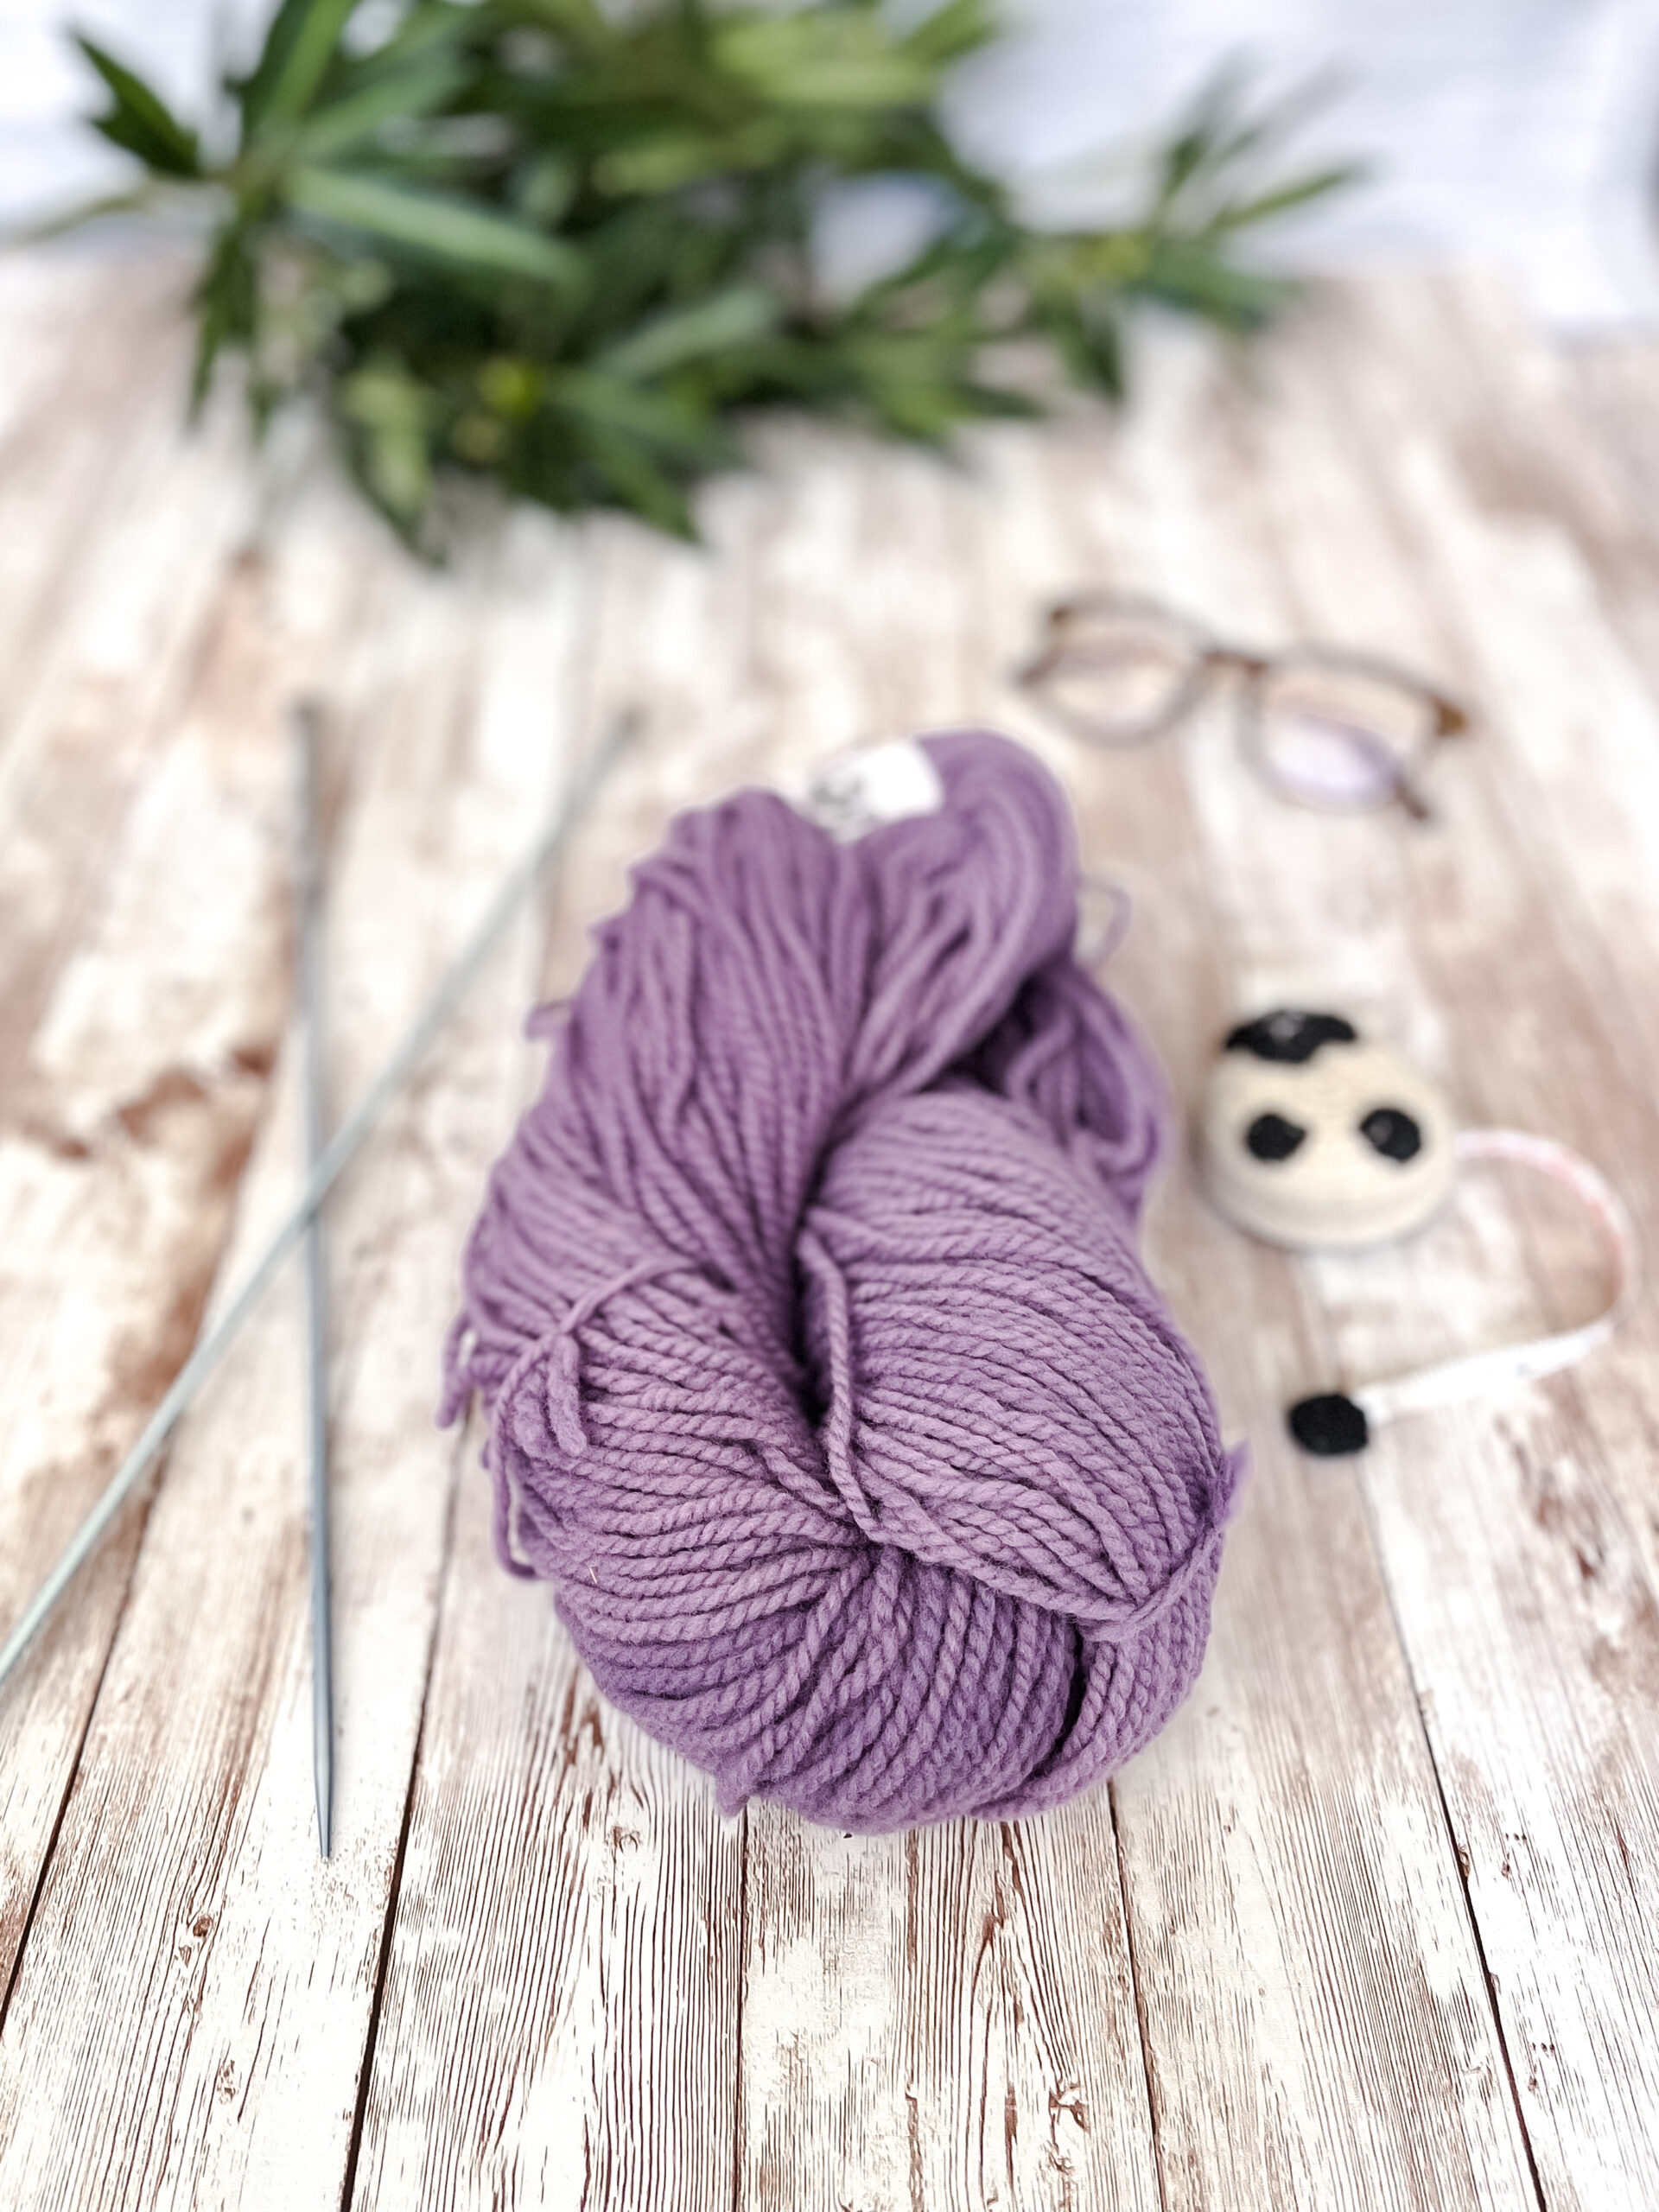 A hank of purple, Virginia farmed fine merino yarn rests on a wood plank, with knitting needles, a sheep measuring tape, a pair of reading glasses, and some greenery around it